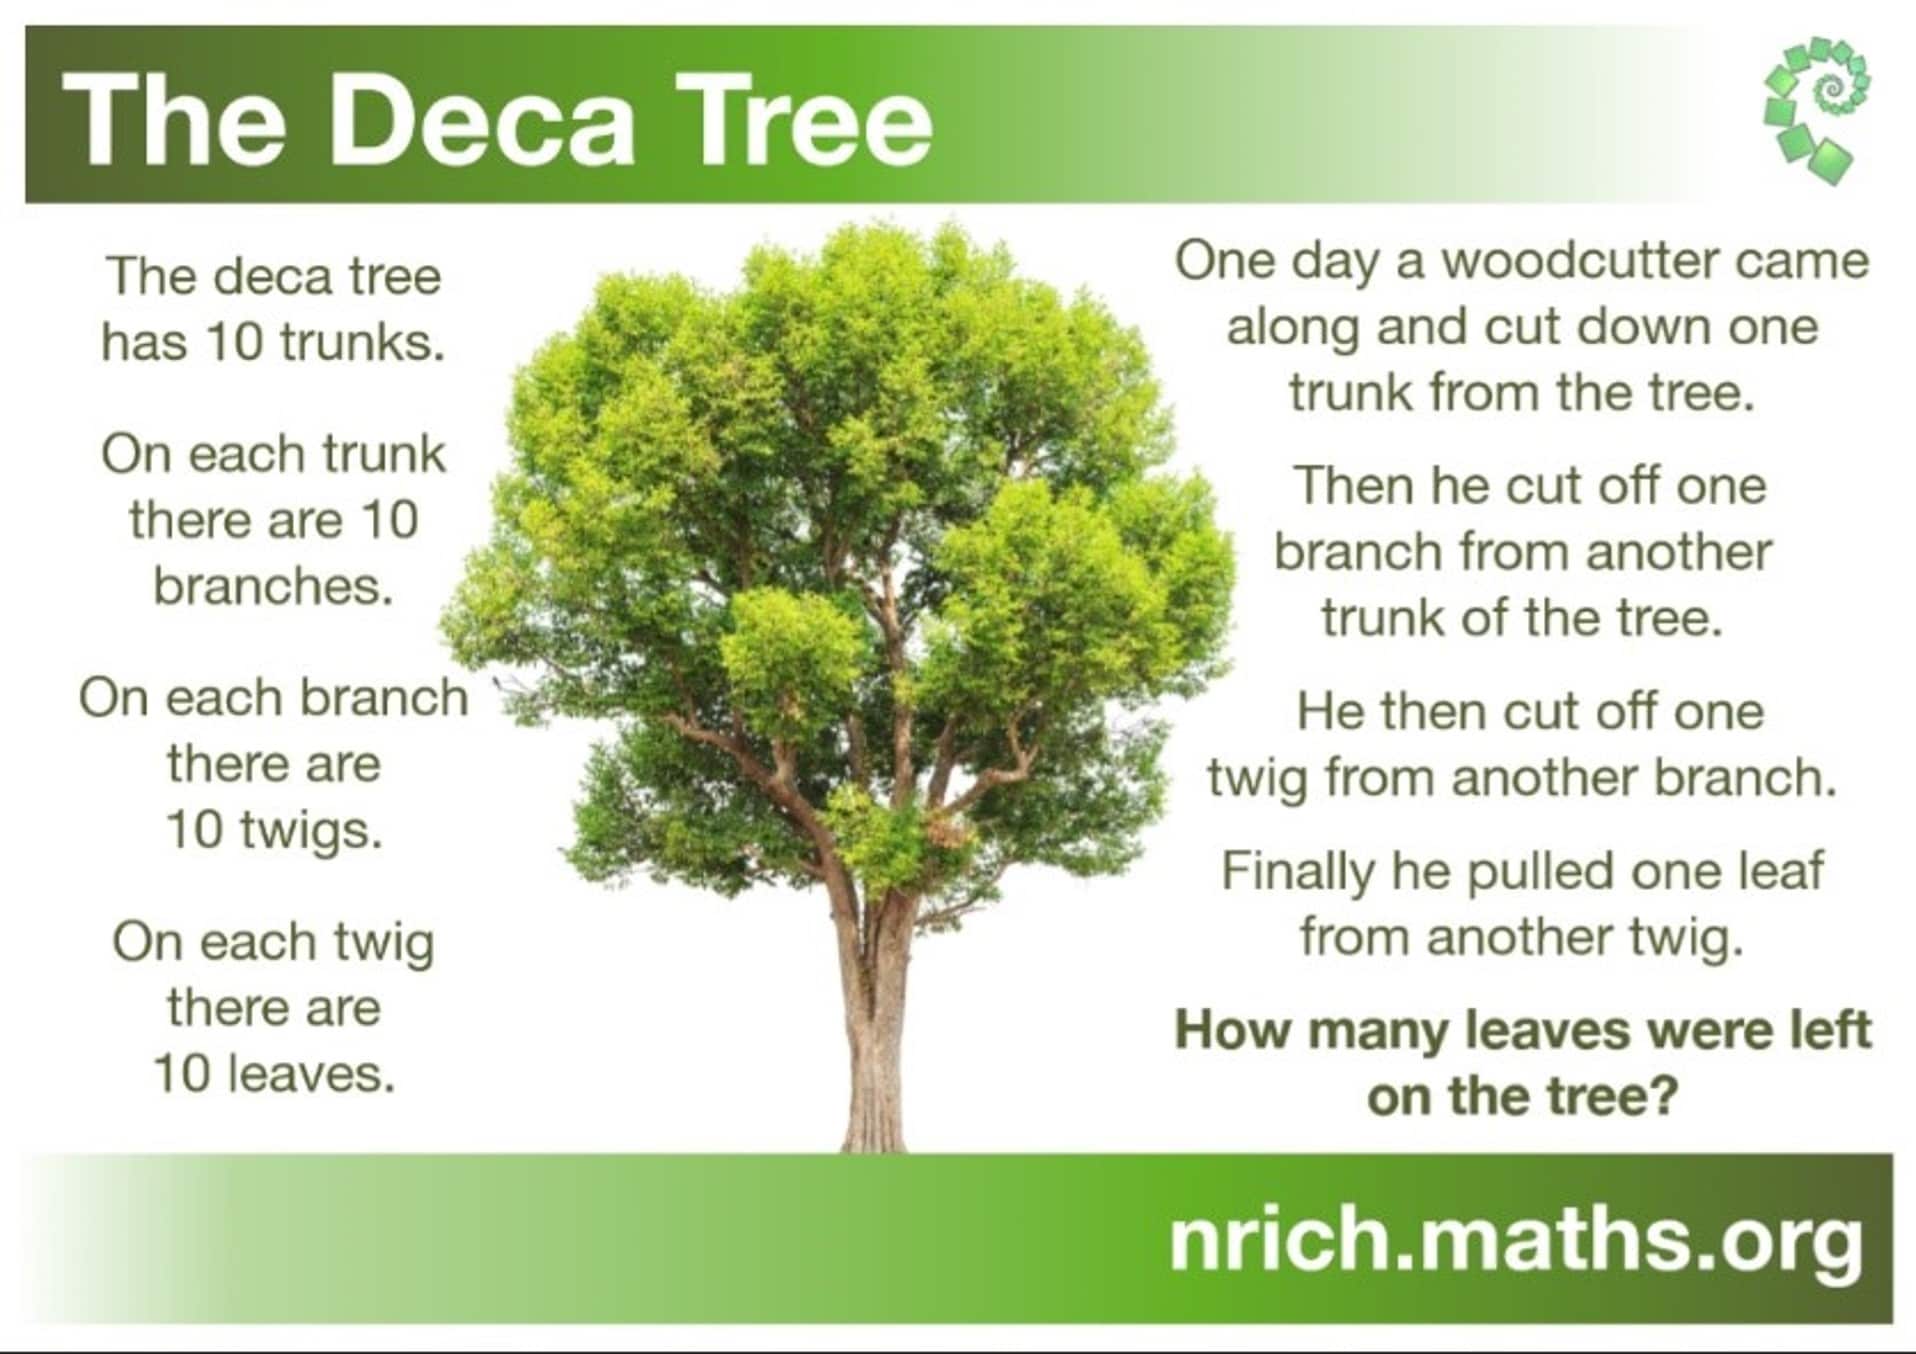 Deca tree graphic from NRICH